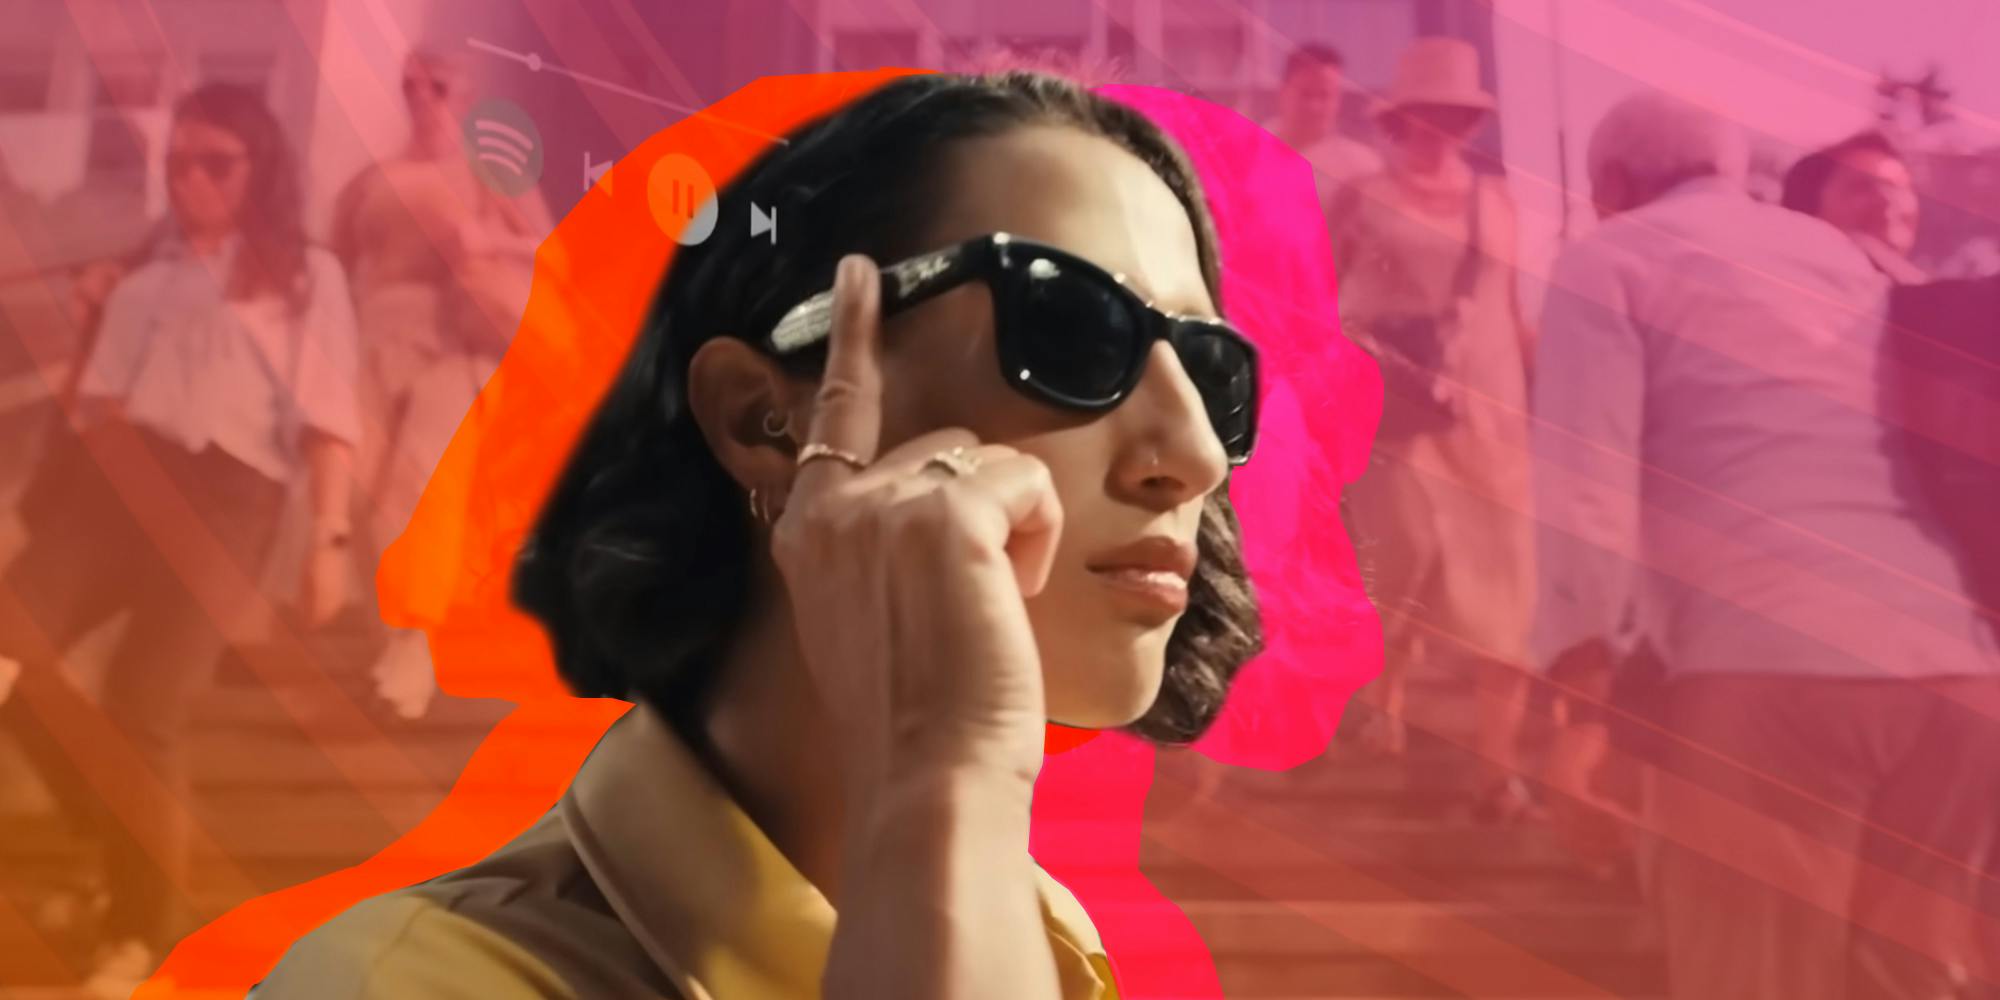 Why You’re Seeing the Ray-Ban Meta Glasses All Over TikTok